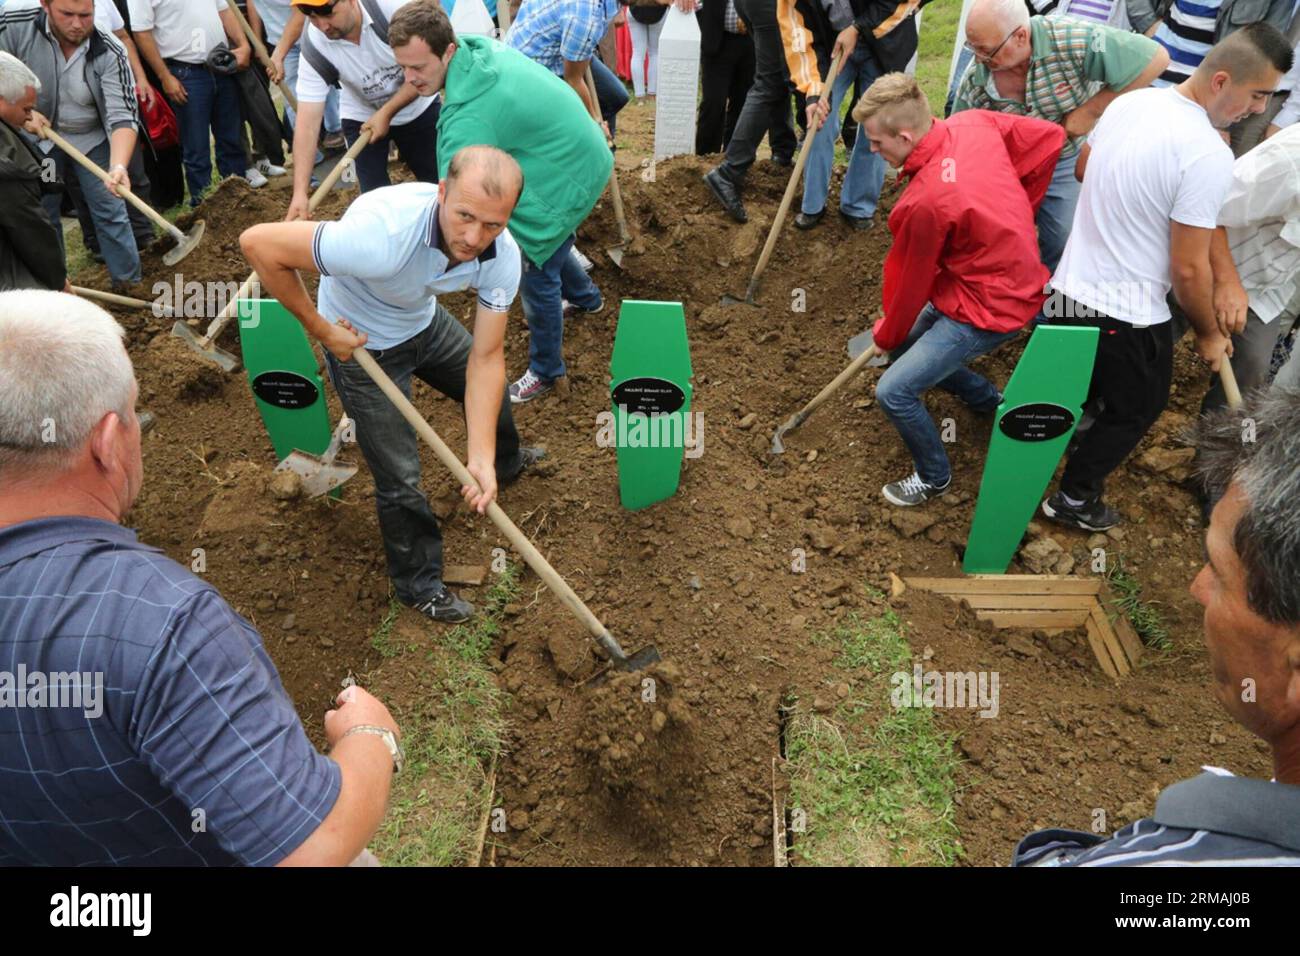 People bury coffins of a man and his two sons during a funeral in Potocari, near Srebrenica, Bosnia and Herzegovina, July 11, 2014. The funeral of 175 recently identified victims was held here Friday to commemorate the 19th anniversary of the Srebrenica massacre. Some 7,000 Muslim men and boys were massacred in and near Srebrenica by Bosnian Serb forces in July 1995, the worst massacre in Europe since the end of World War II. (Xinhua/Haris Memija) (zjl) BIH-SREBRENICA-MASSACRE-19TH ANIVERSARY PUBLICATIONxNOTxINxCHN   Celebrities Bury Coffin of a Man and His Two Sons during a Funeral in  Near S Stock Photo